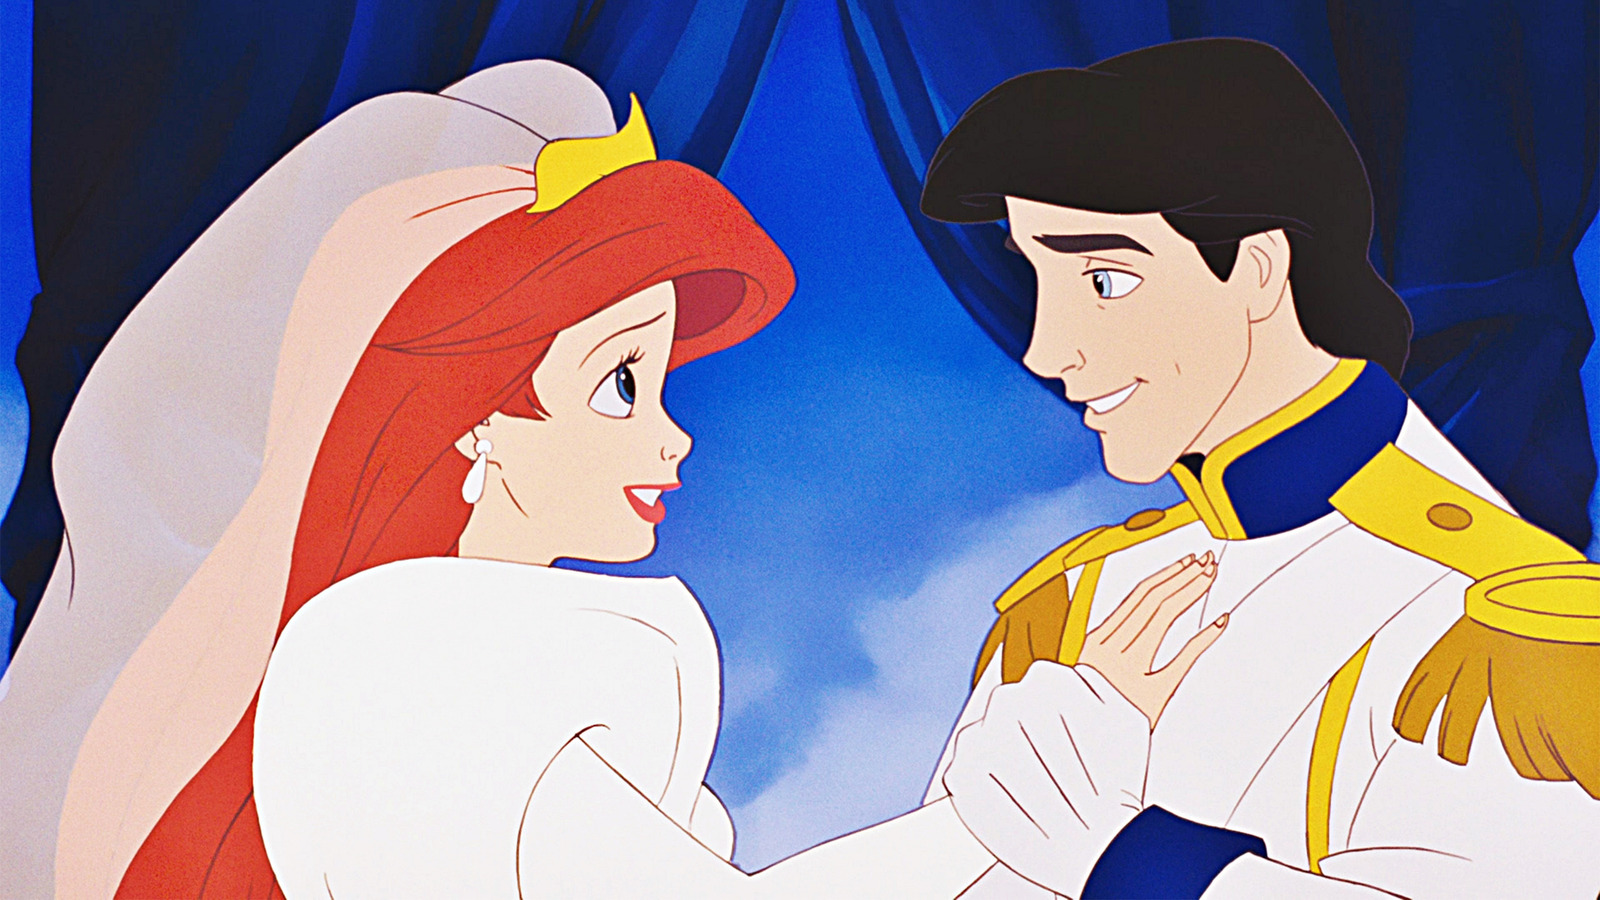 Explanation of Prince Eric's backstory in The Little Mermaid